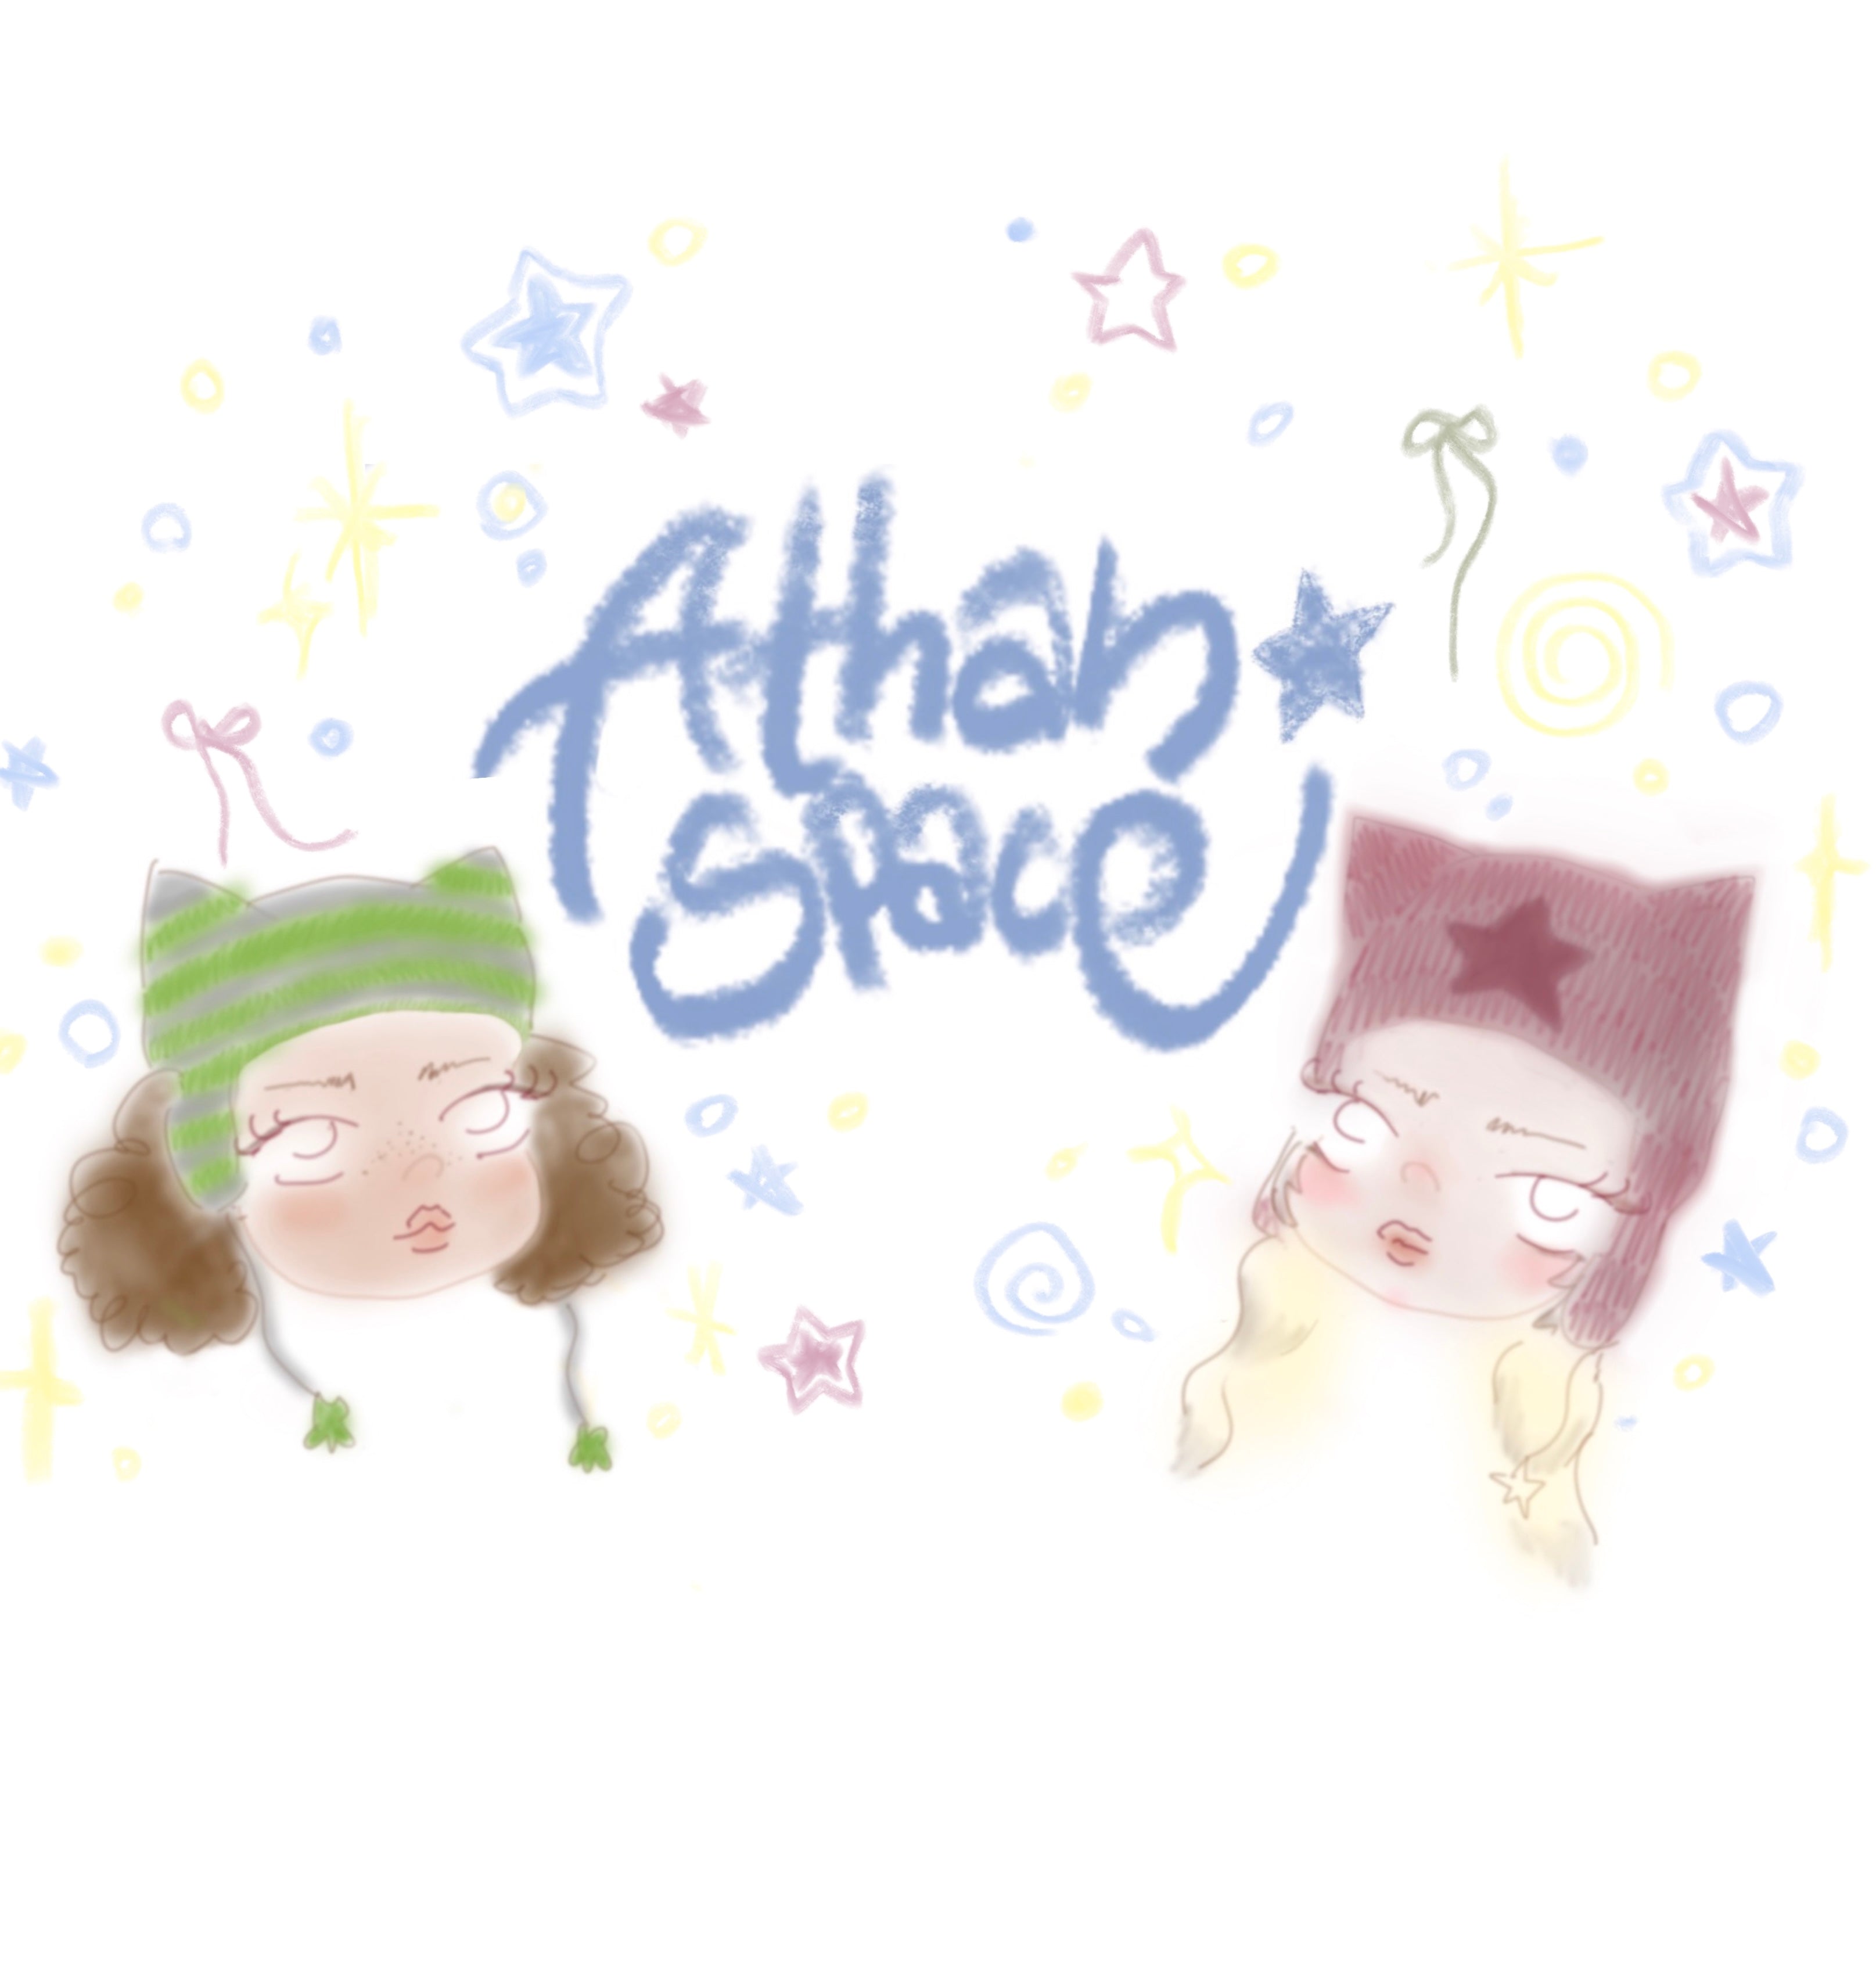 Athan Space